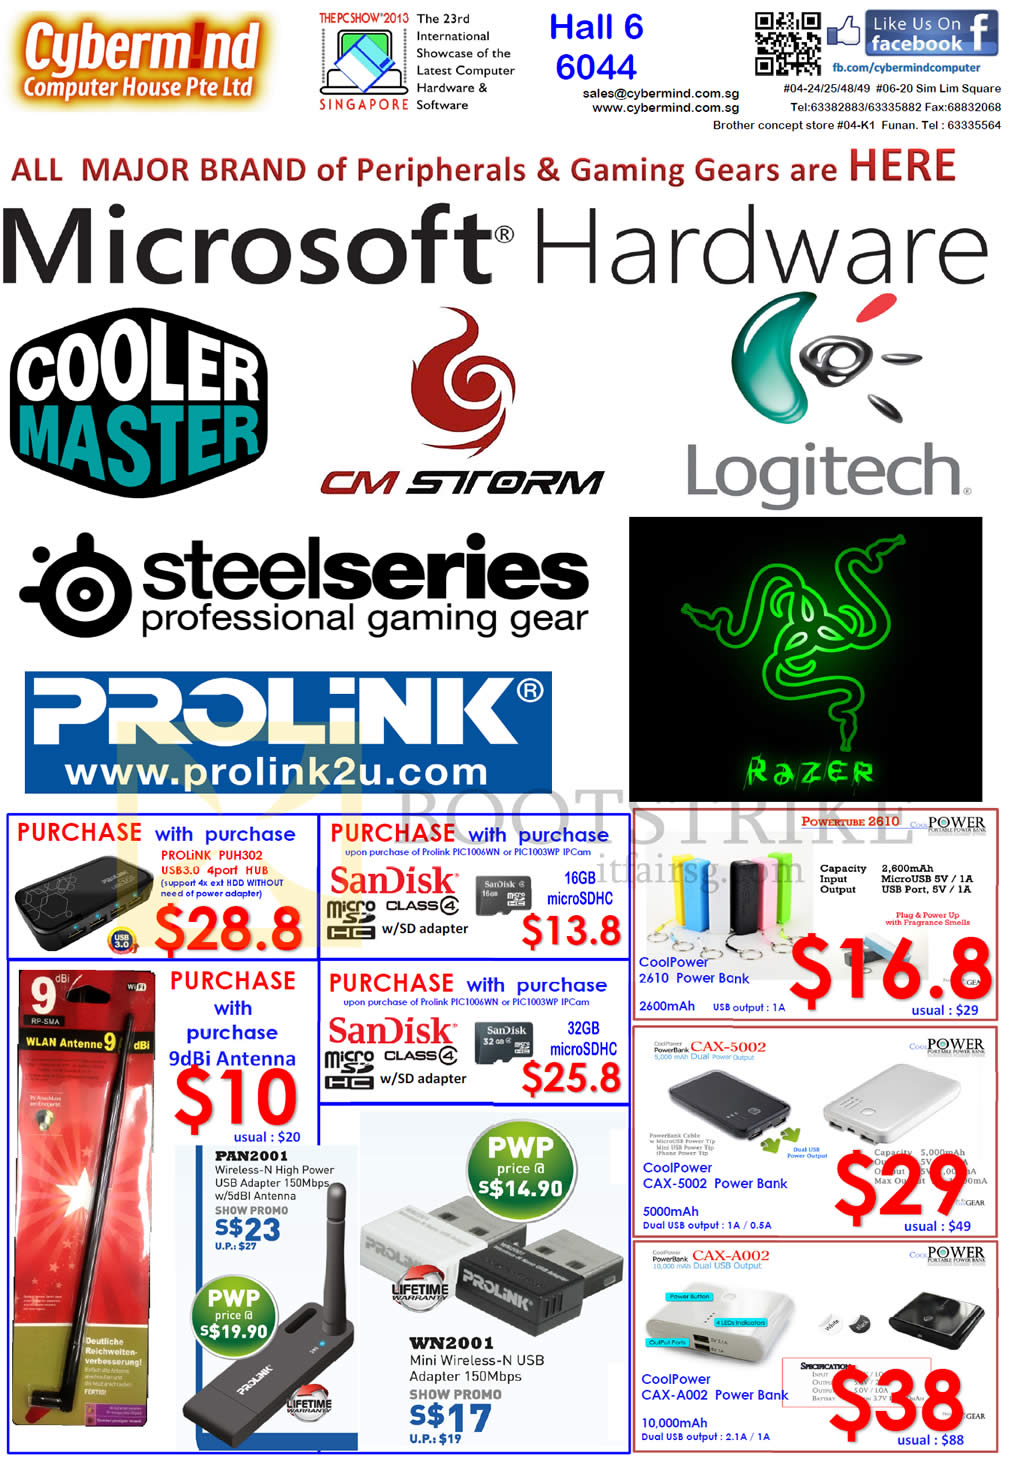 PC SHOW 2013 price list image brochure of Cybermind Purchase With Purchase, Portable Charger